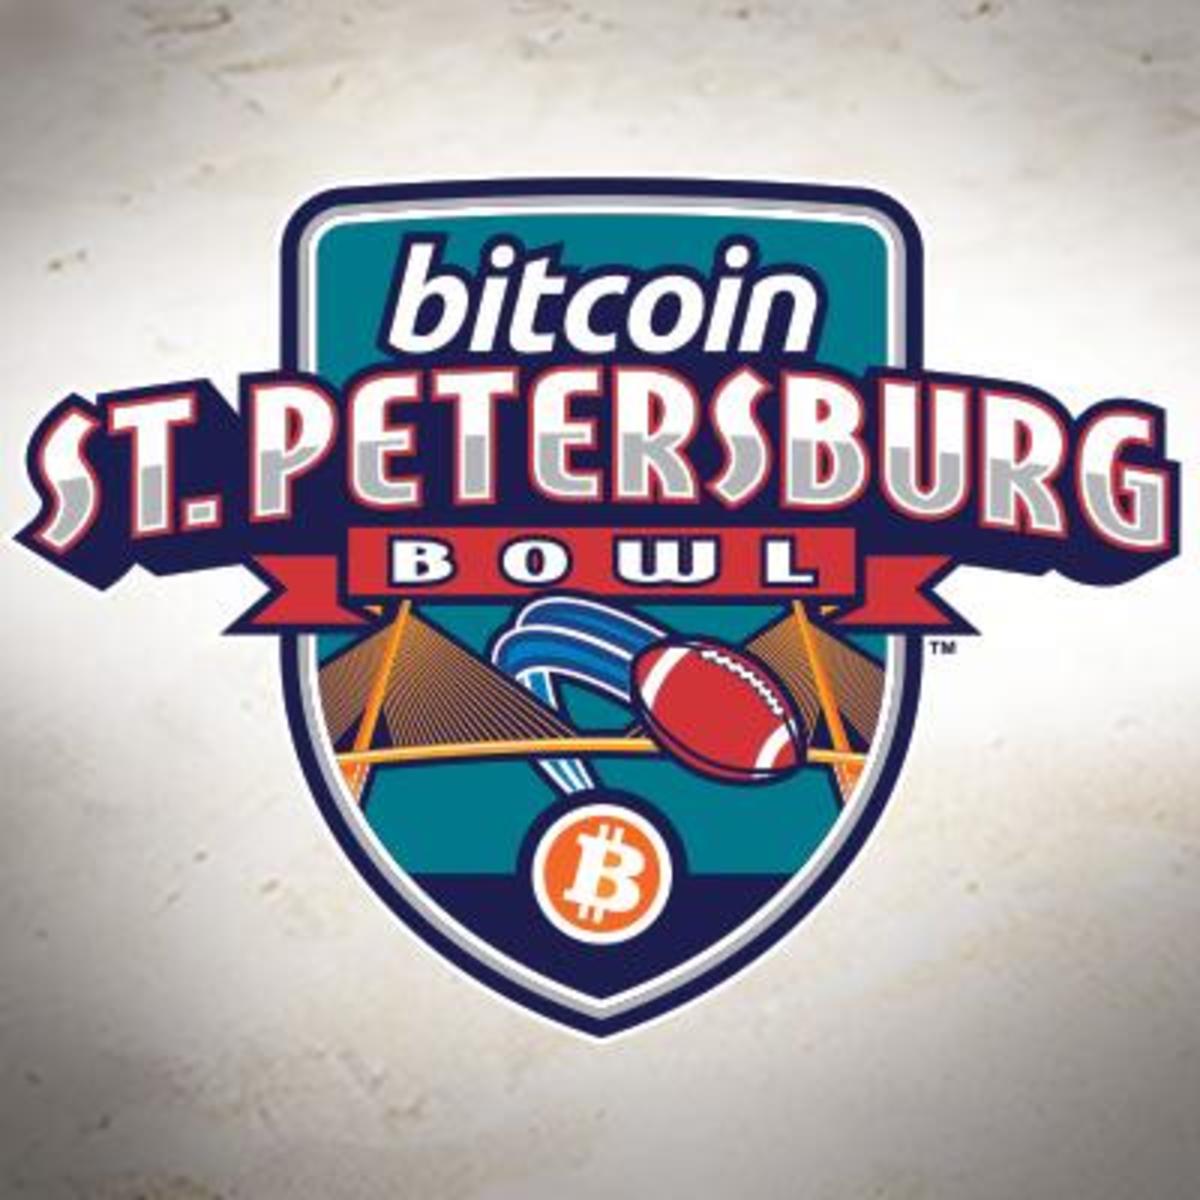 Bitcoin exhange BitPay will sponsor a bowl game played at Tropicana Field in St. Petersburg, Fla.